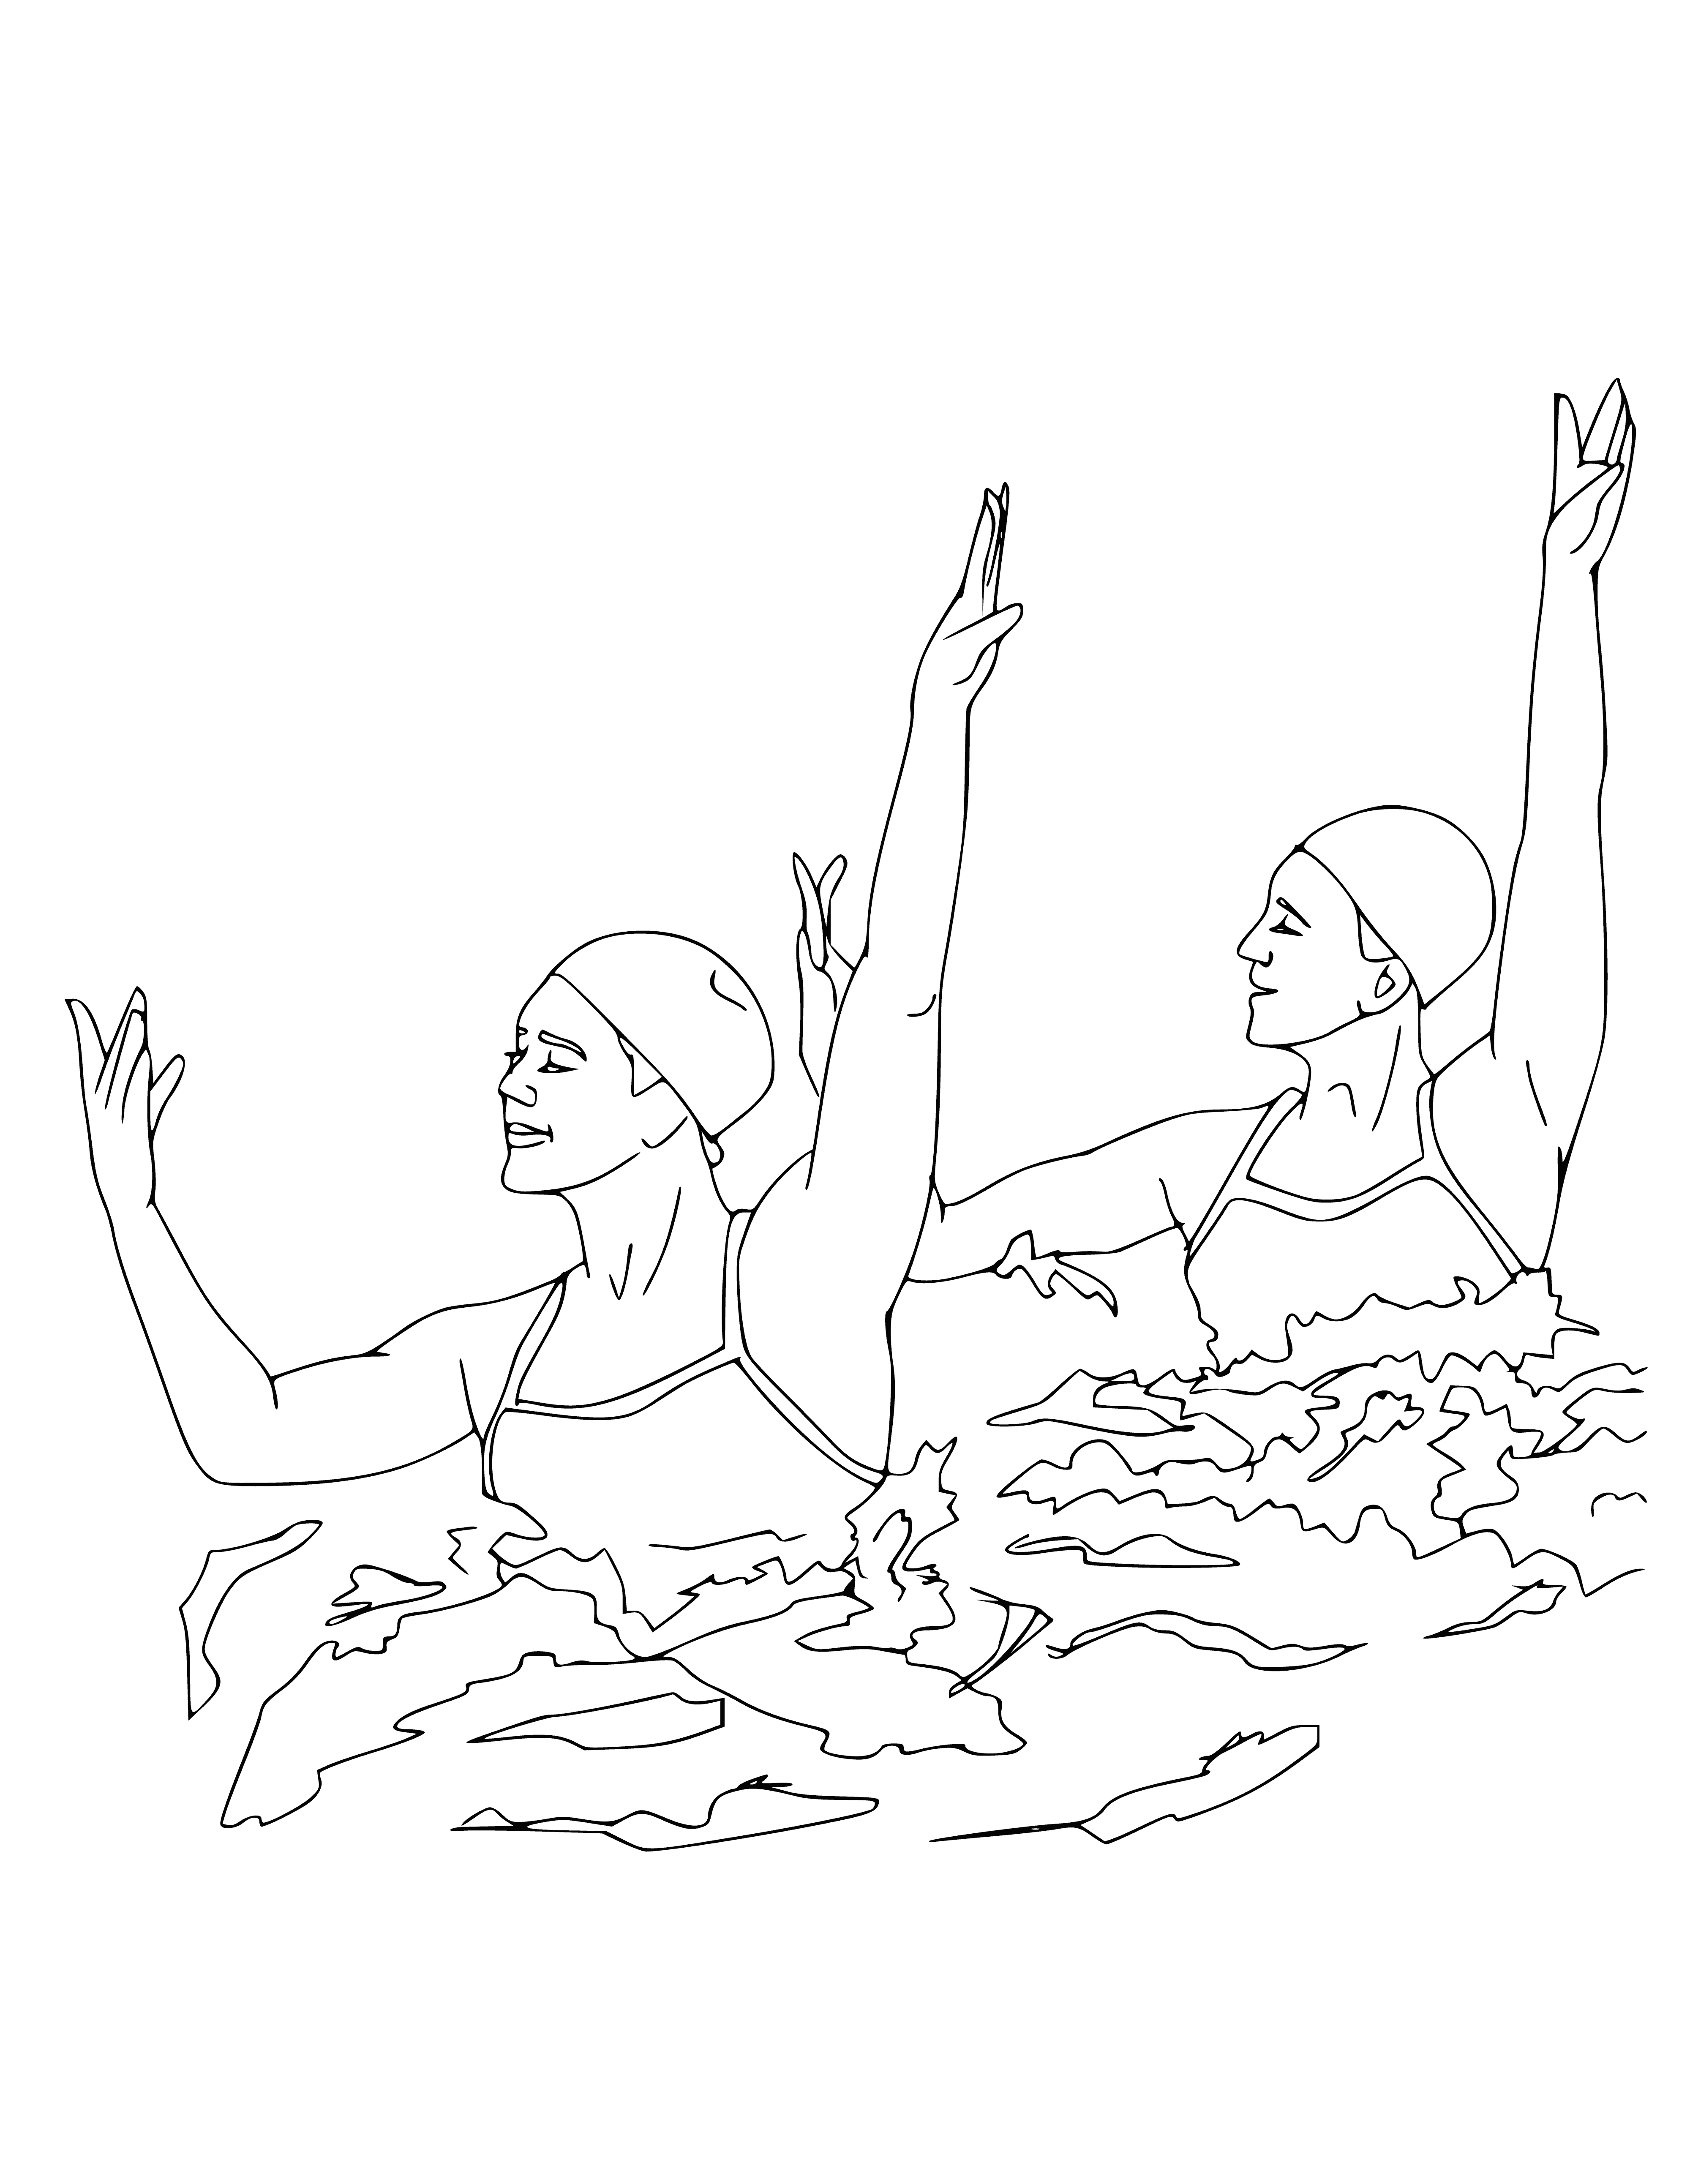 coloring page: => Eight synchronized swimmers in caps & suits doing flips & turns in pool, with reflection on surface.